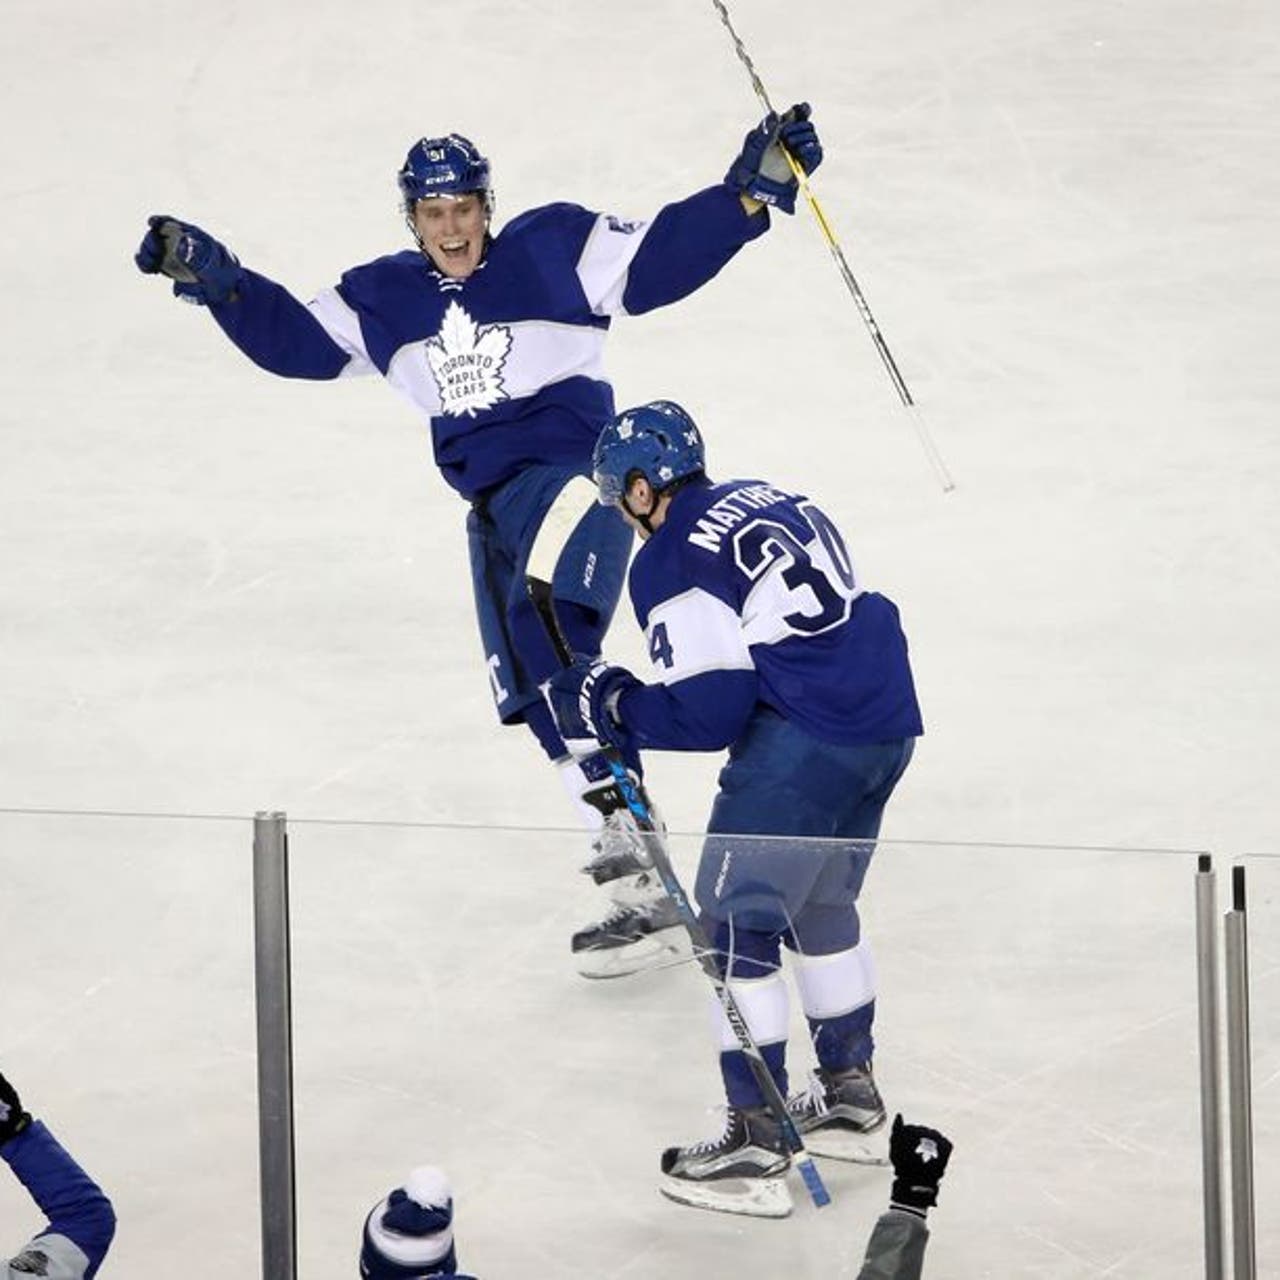 Three takeaways from Toronto Maple Leafs' 3-1 win over Los Angeles Kings